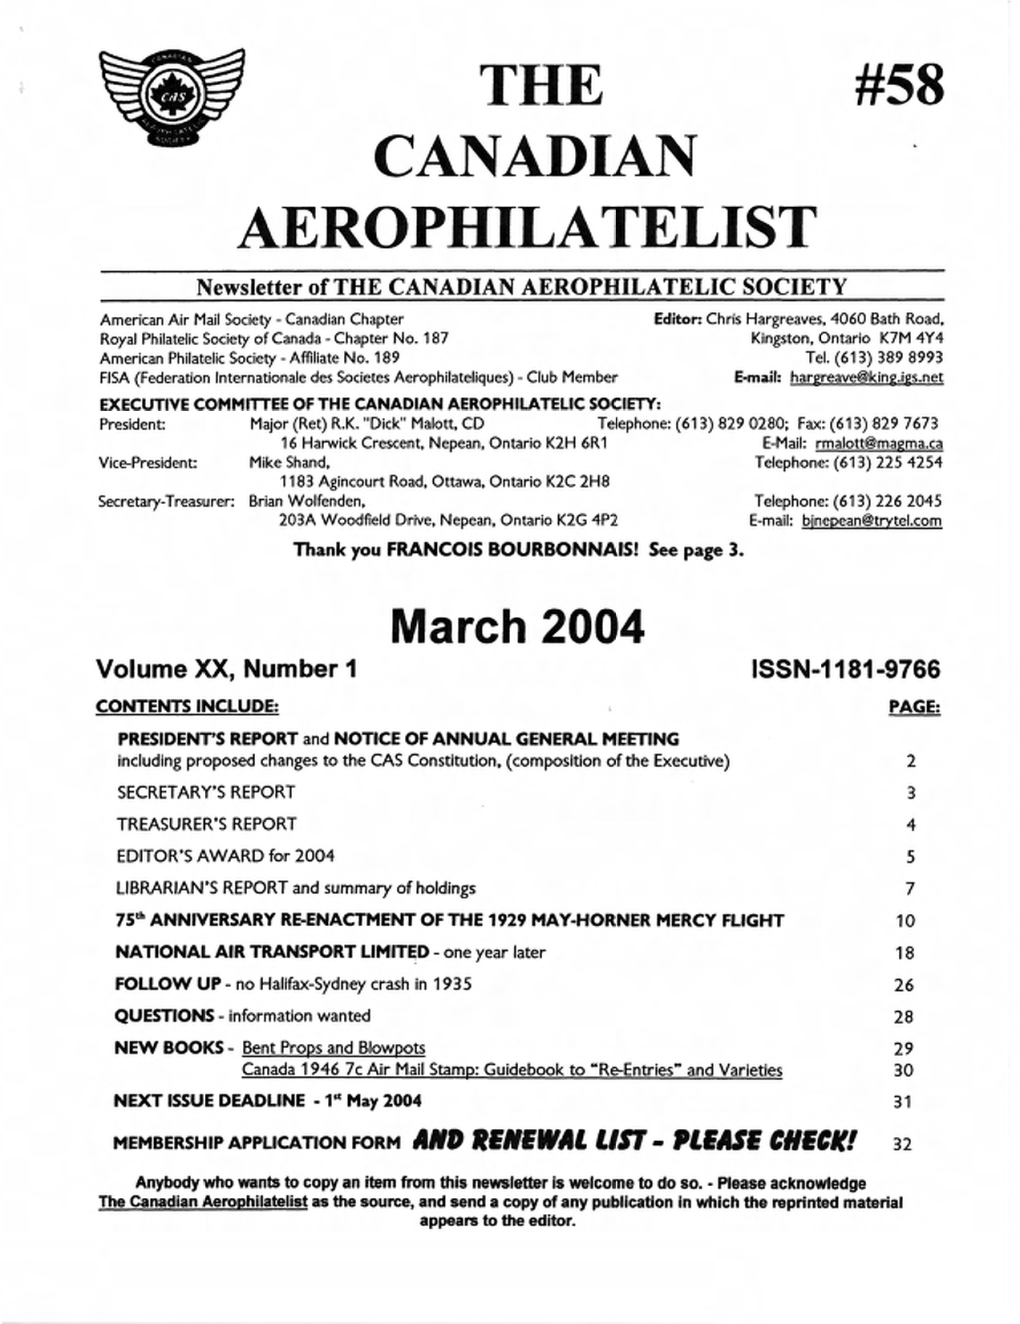 NATIONAL AIR TRANSPORT LIMITED - One Year Later � 18